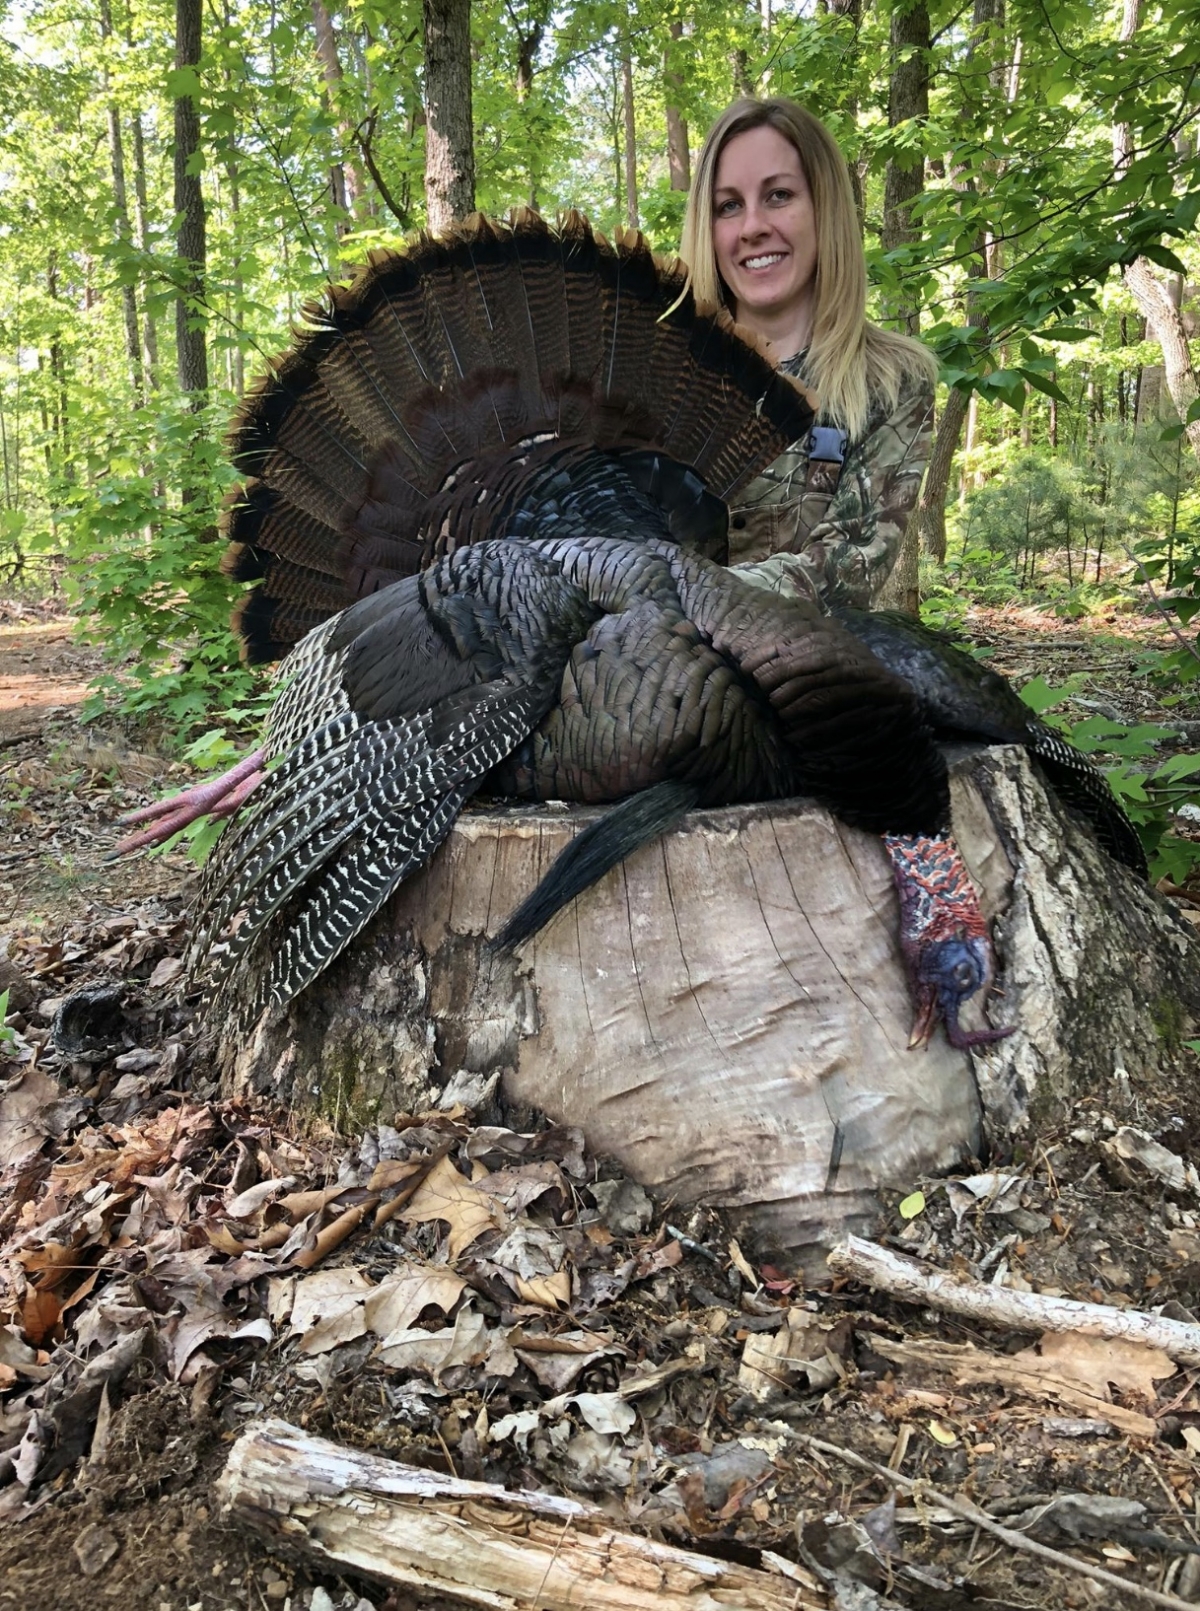 STAR CITY SPRING GOBBLER 2020 7TH ANNUAL BEST PHOTO CONTEST